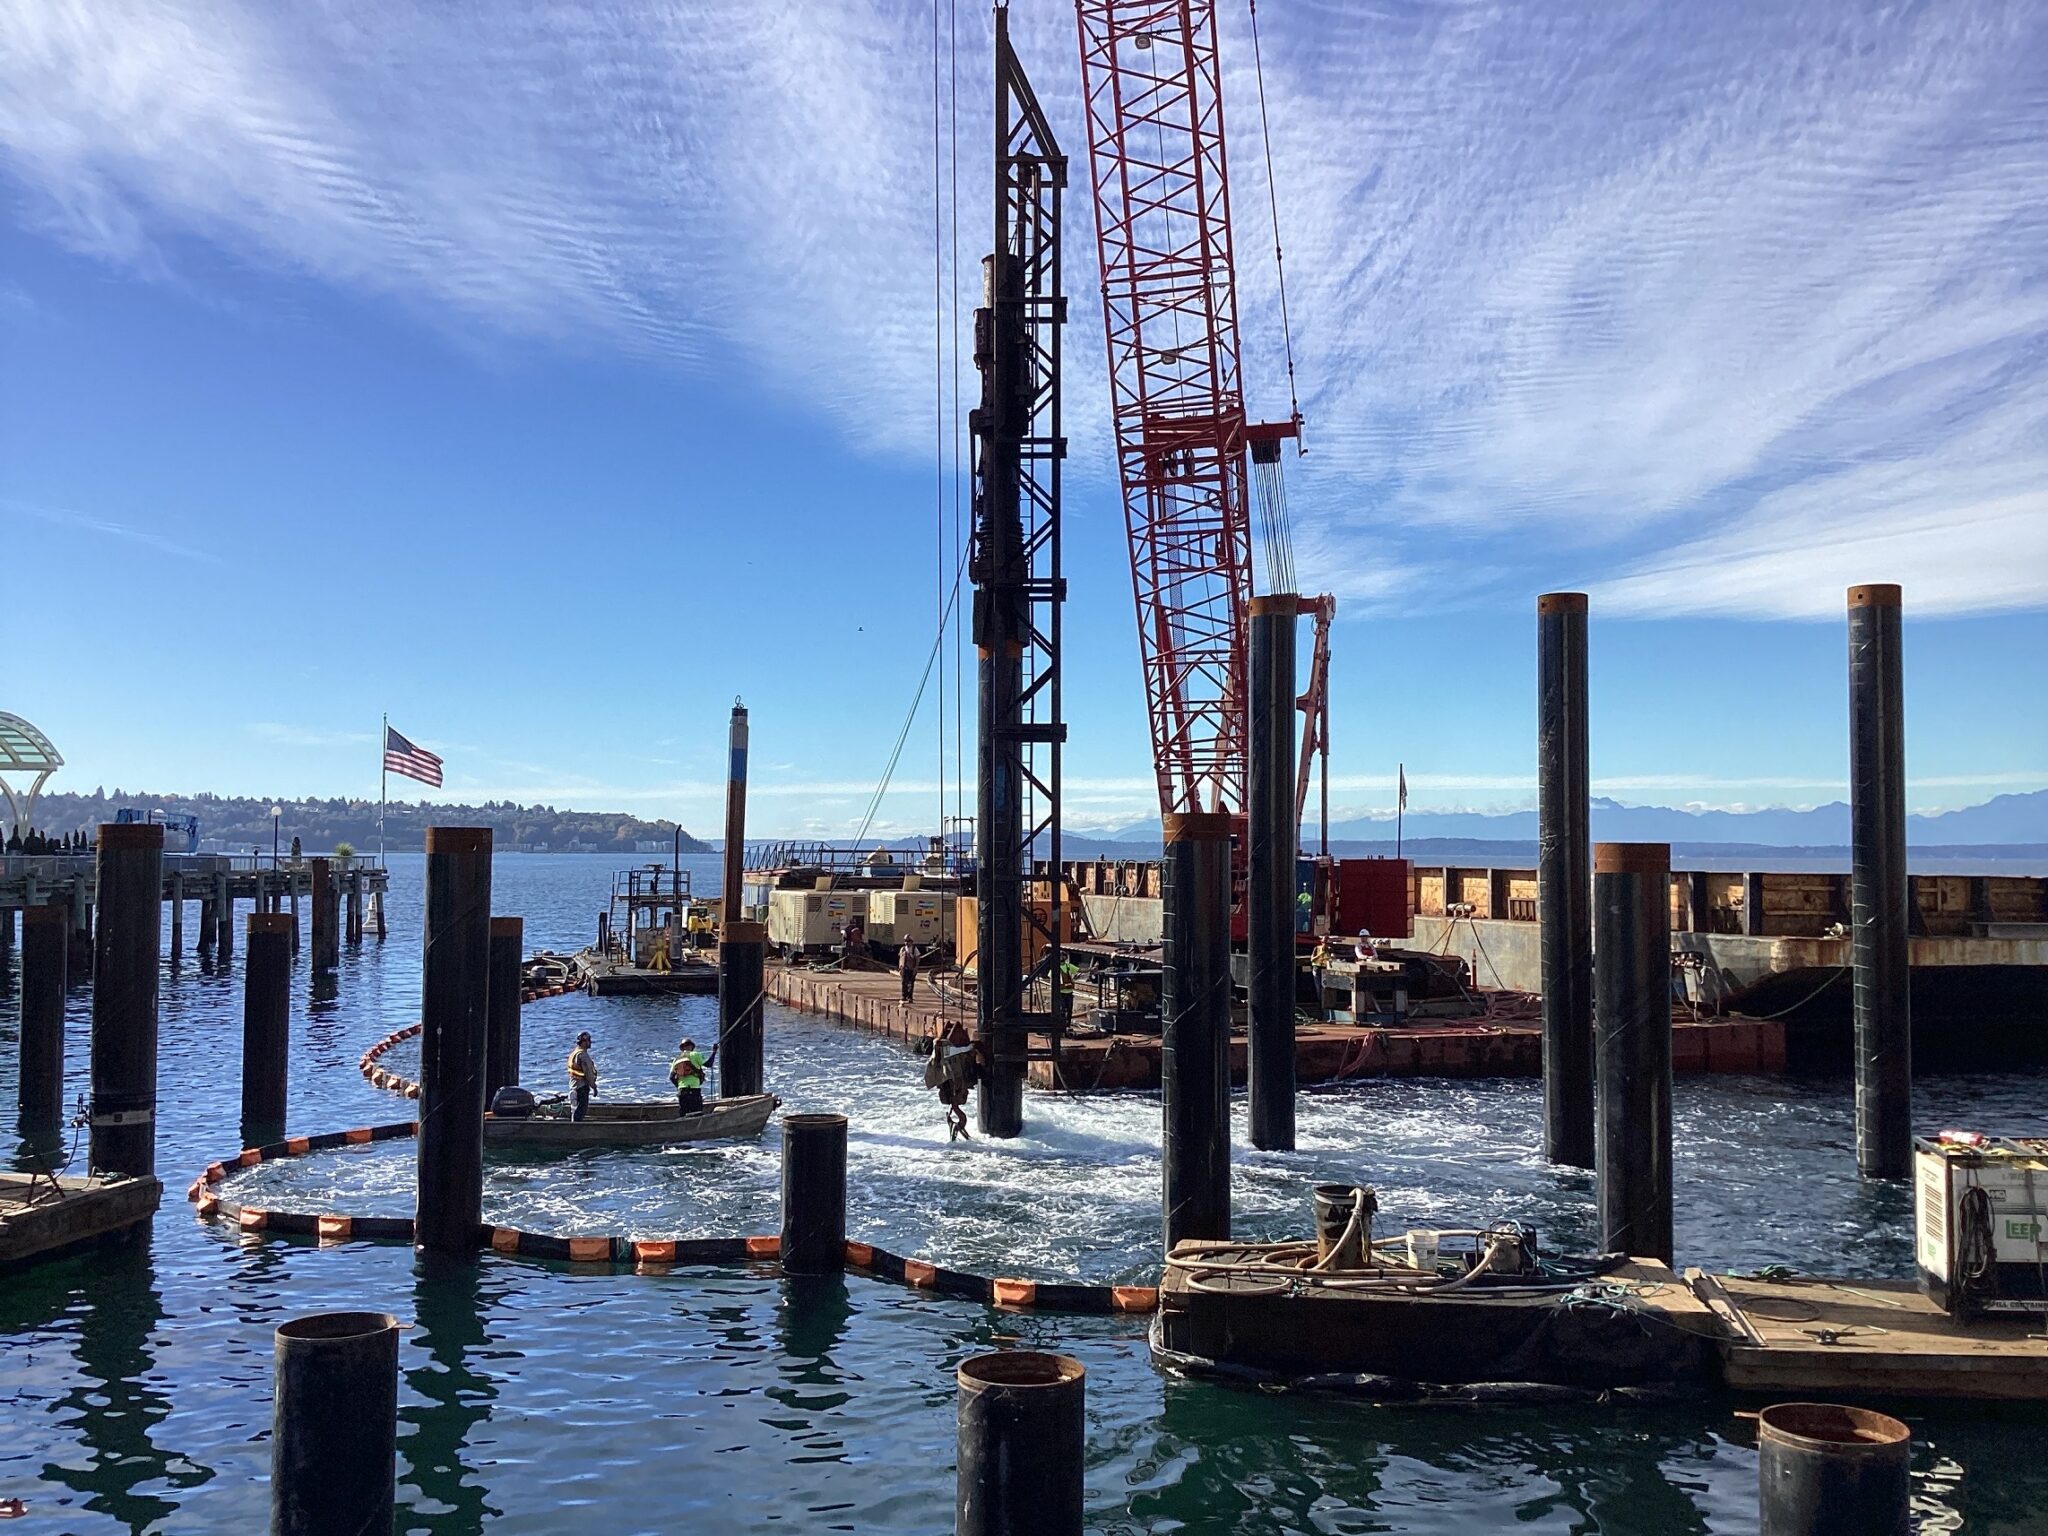 Image of pile installation at a large body of water on a sunny day. Work crews and a large crane are in the background.